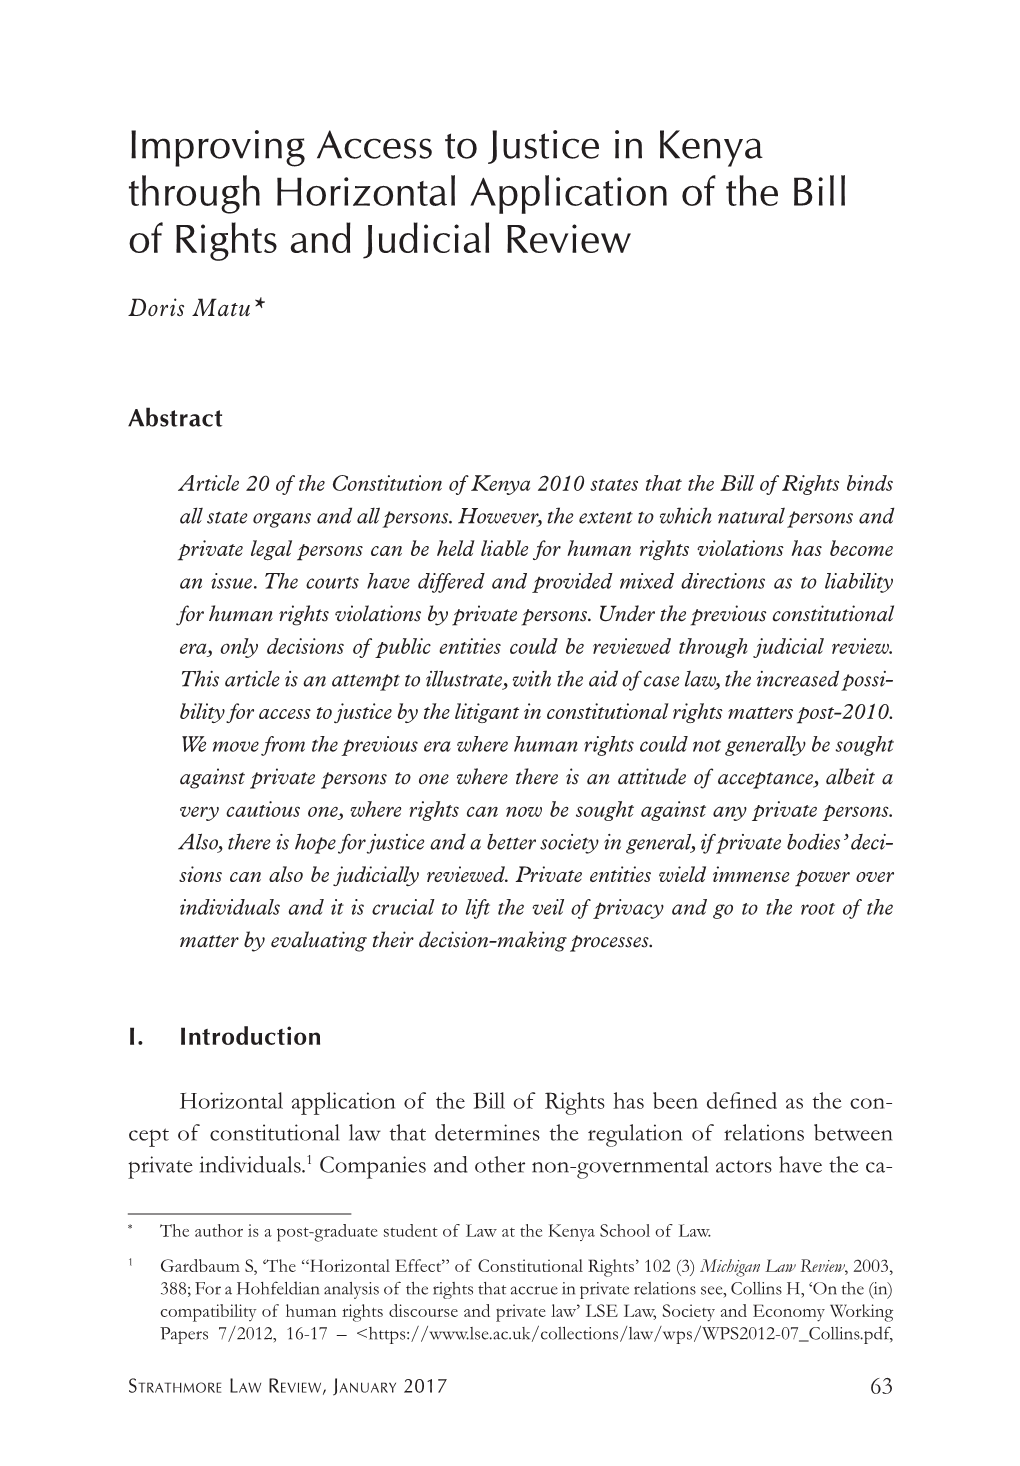 Improving Access to Justice in Kenya Through Horizontal Application of the Bill of Rights and Judicial Review